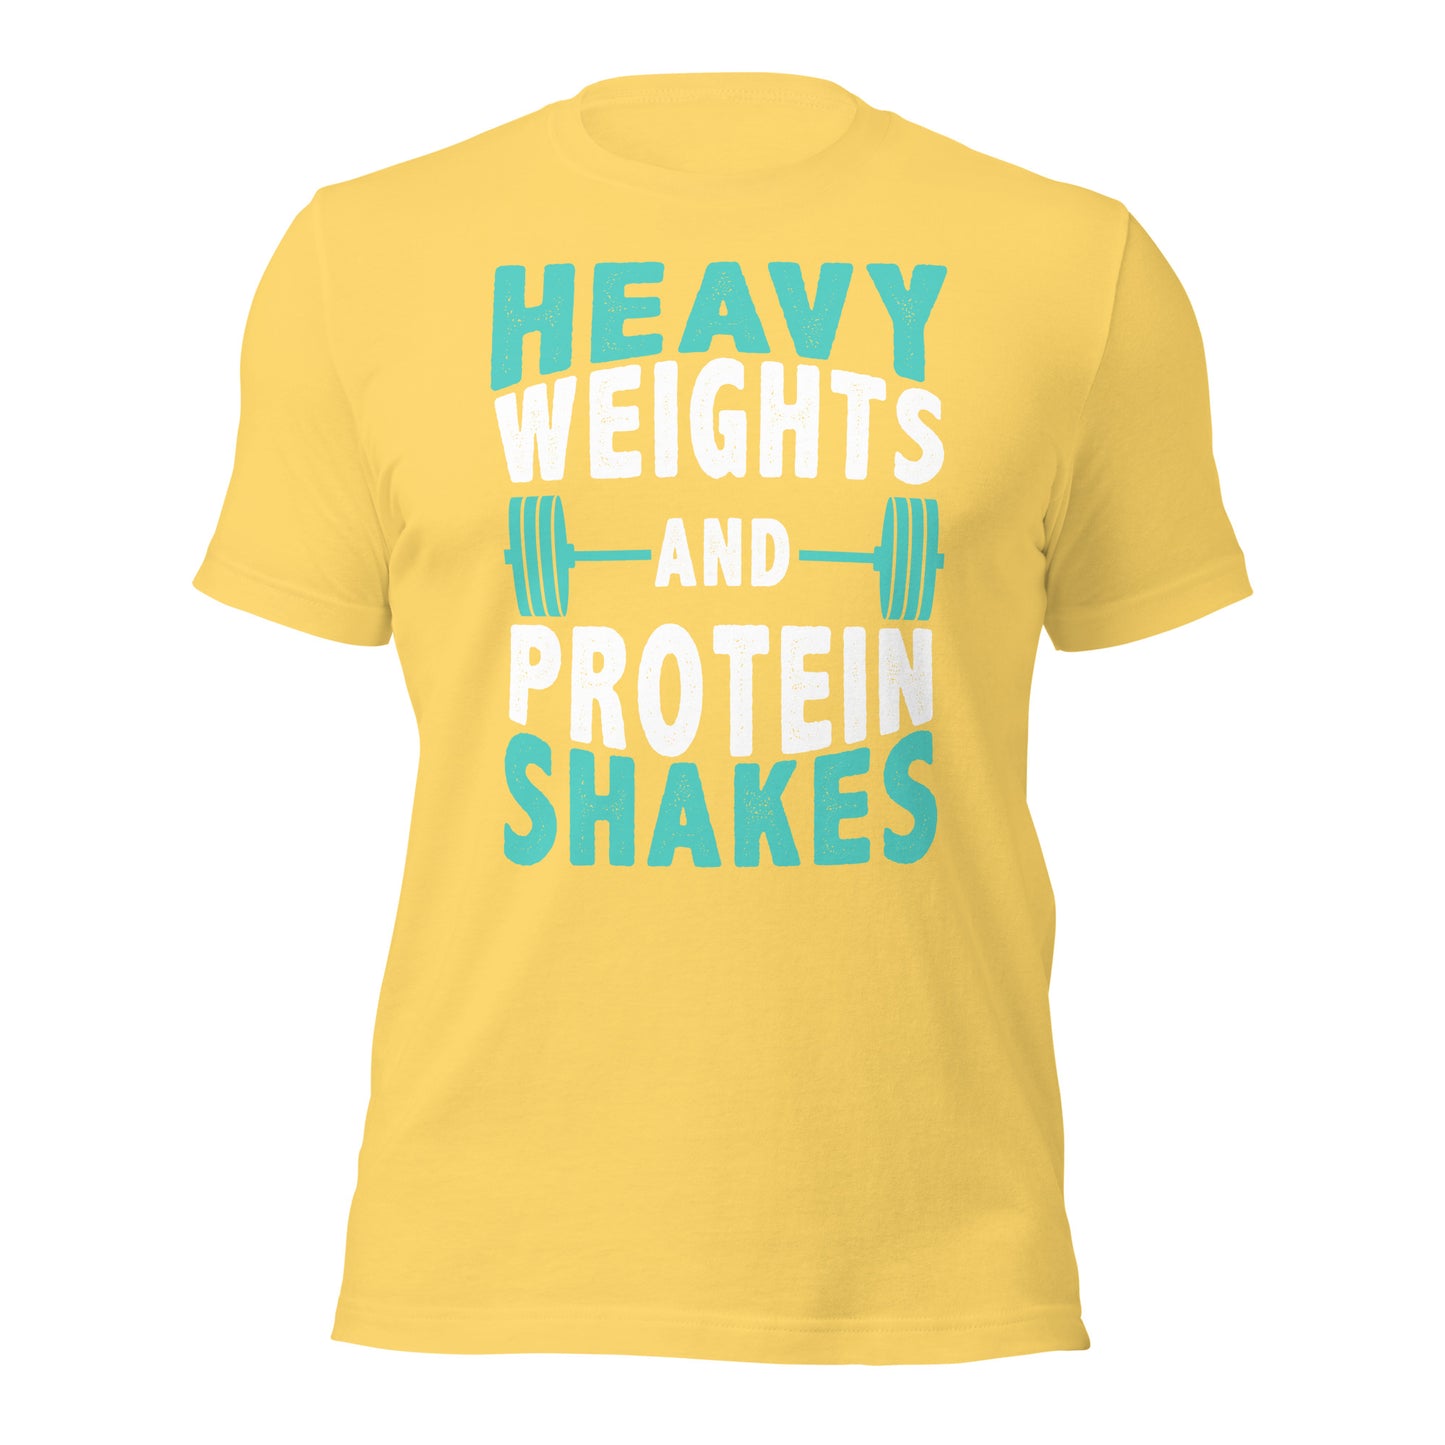 Heavy weights protein shakes tee yellow